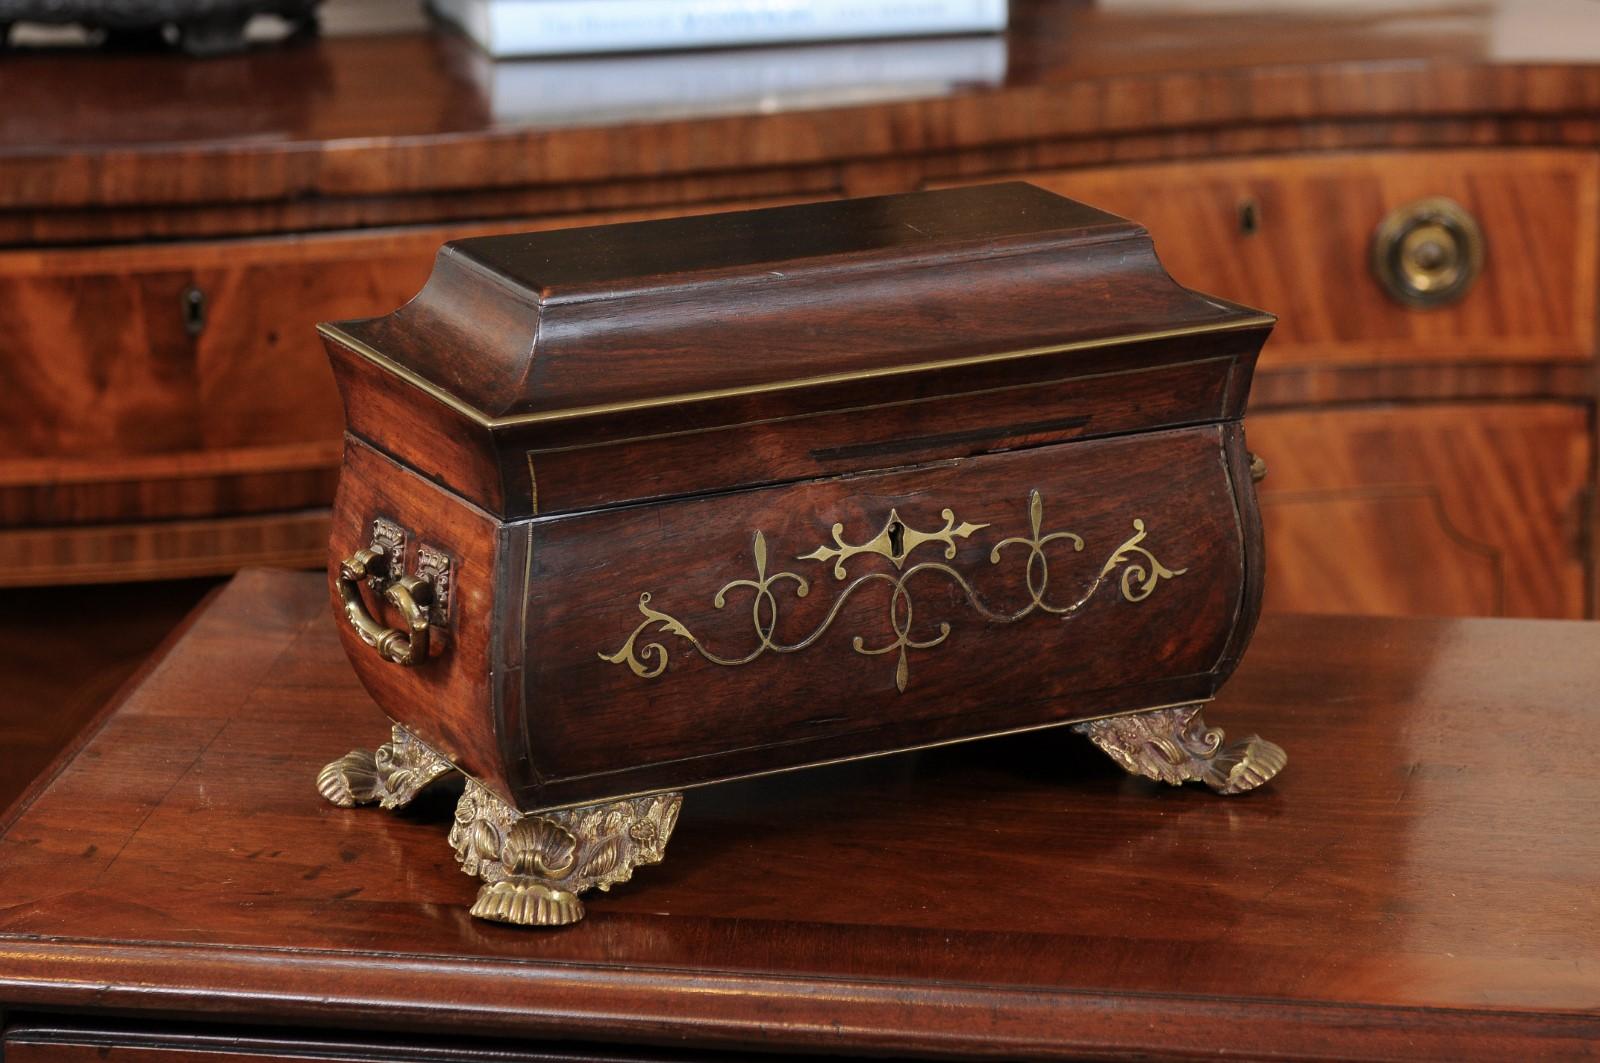 English Regency Pagoda Form Work Box with Brass Feet & Inlay, Early 19th Century England For Sale